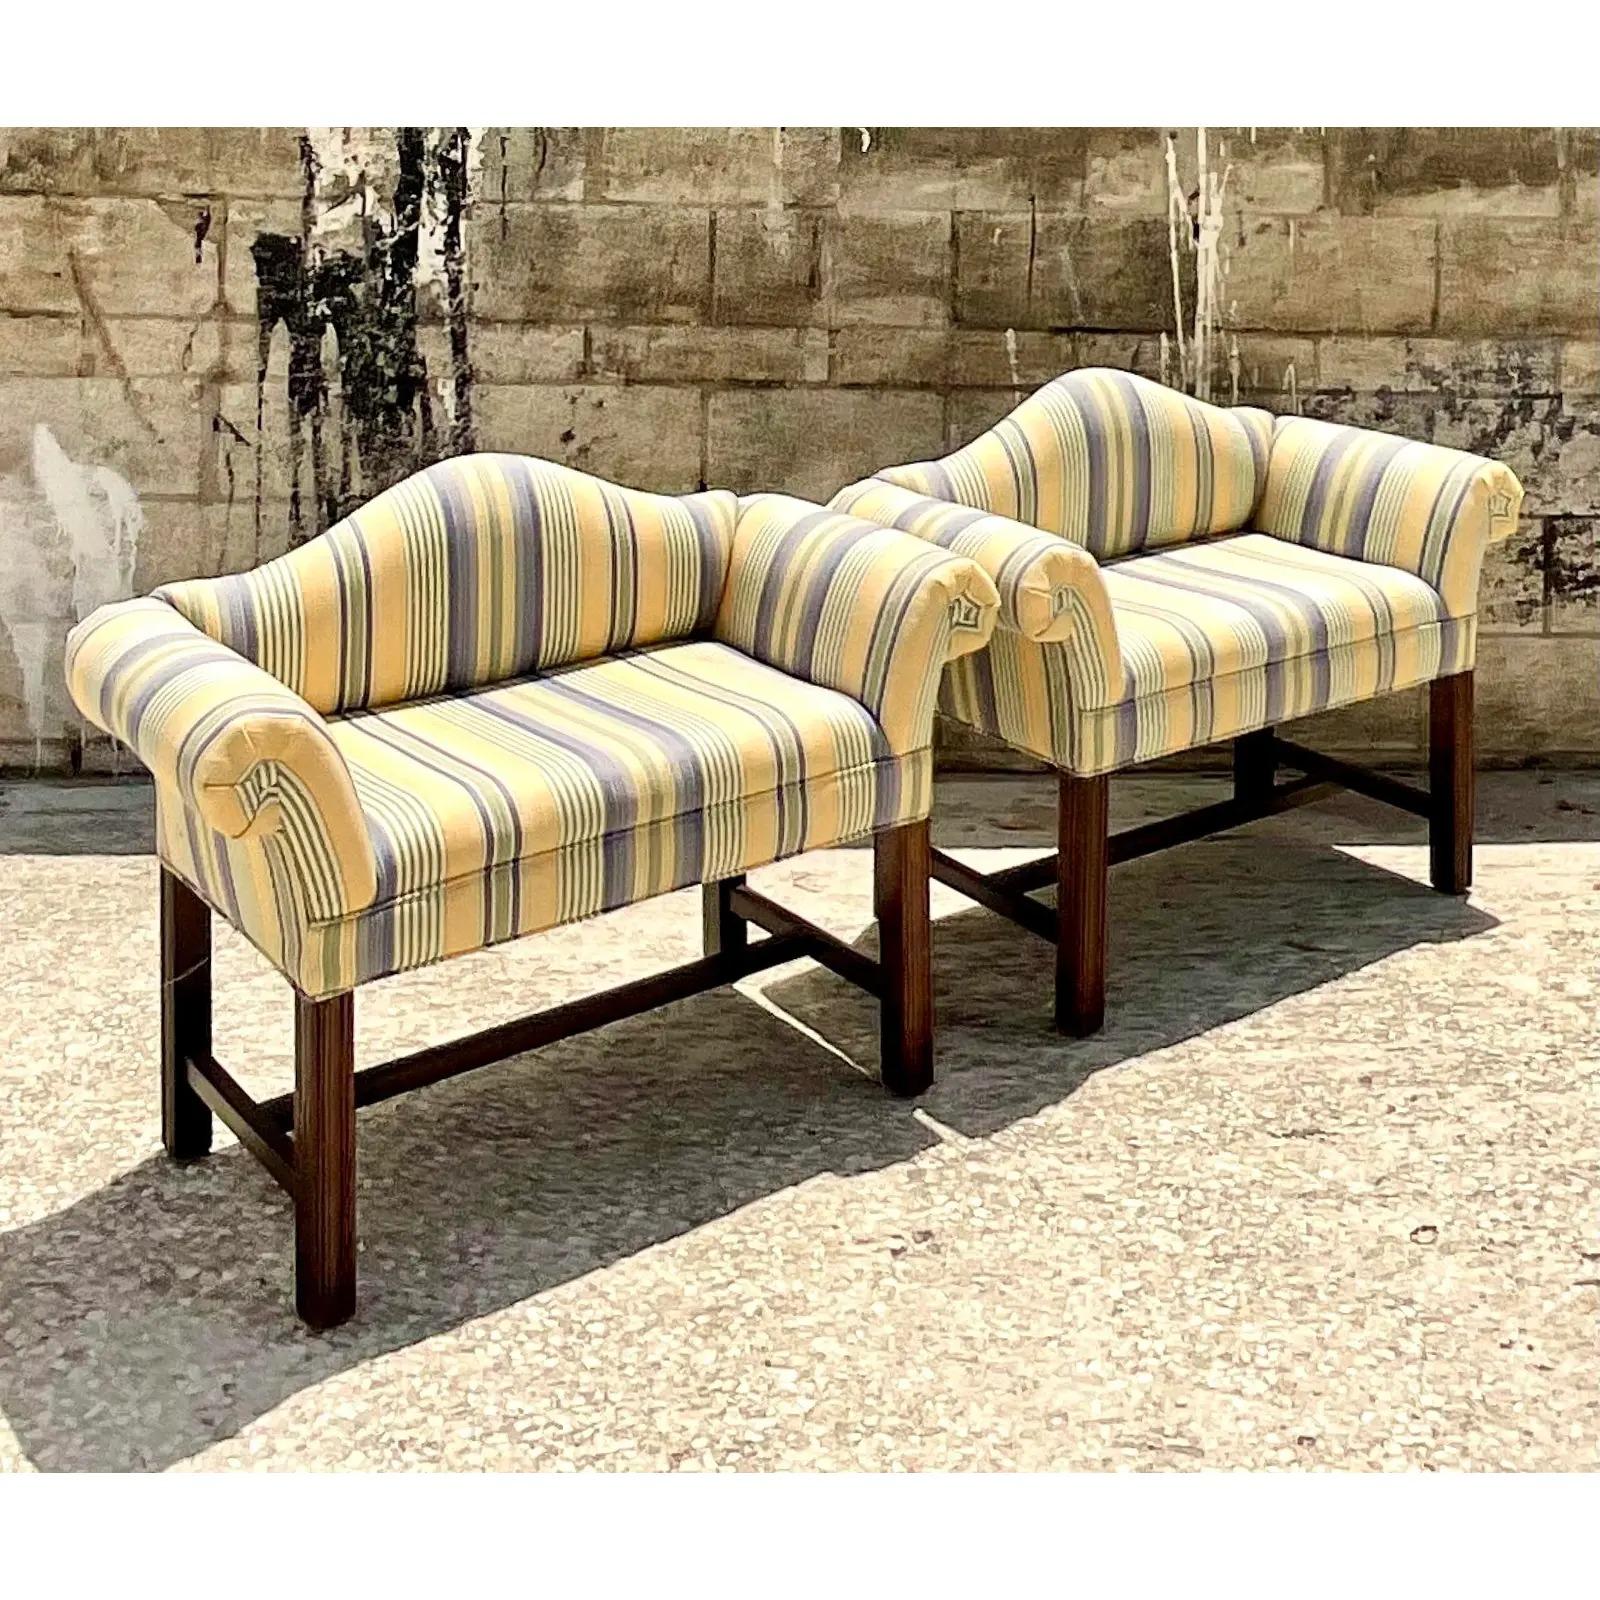 Super charming pair of vintage petite sofas. Classic camelback design in a chic awning stripe. Small is size, but big on glamour. Acquired from a Palm Beach estate.